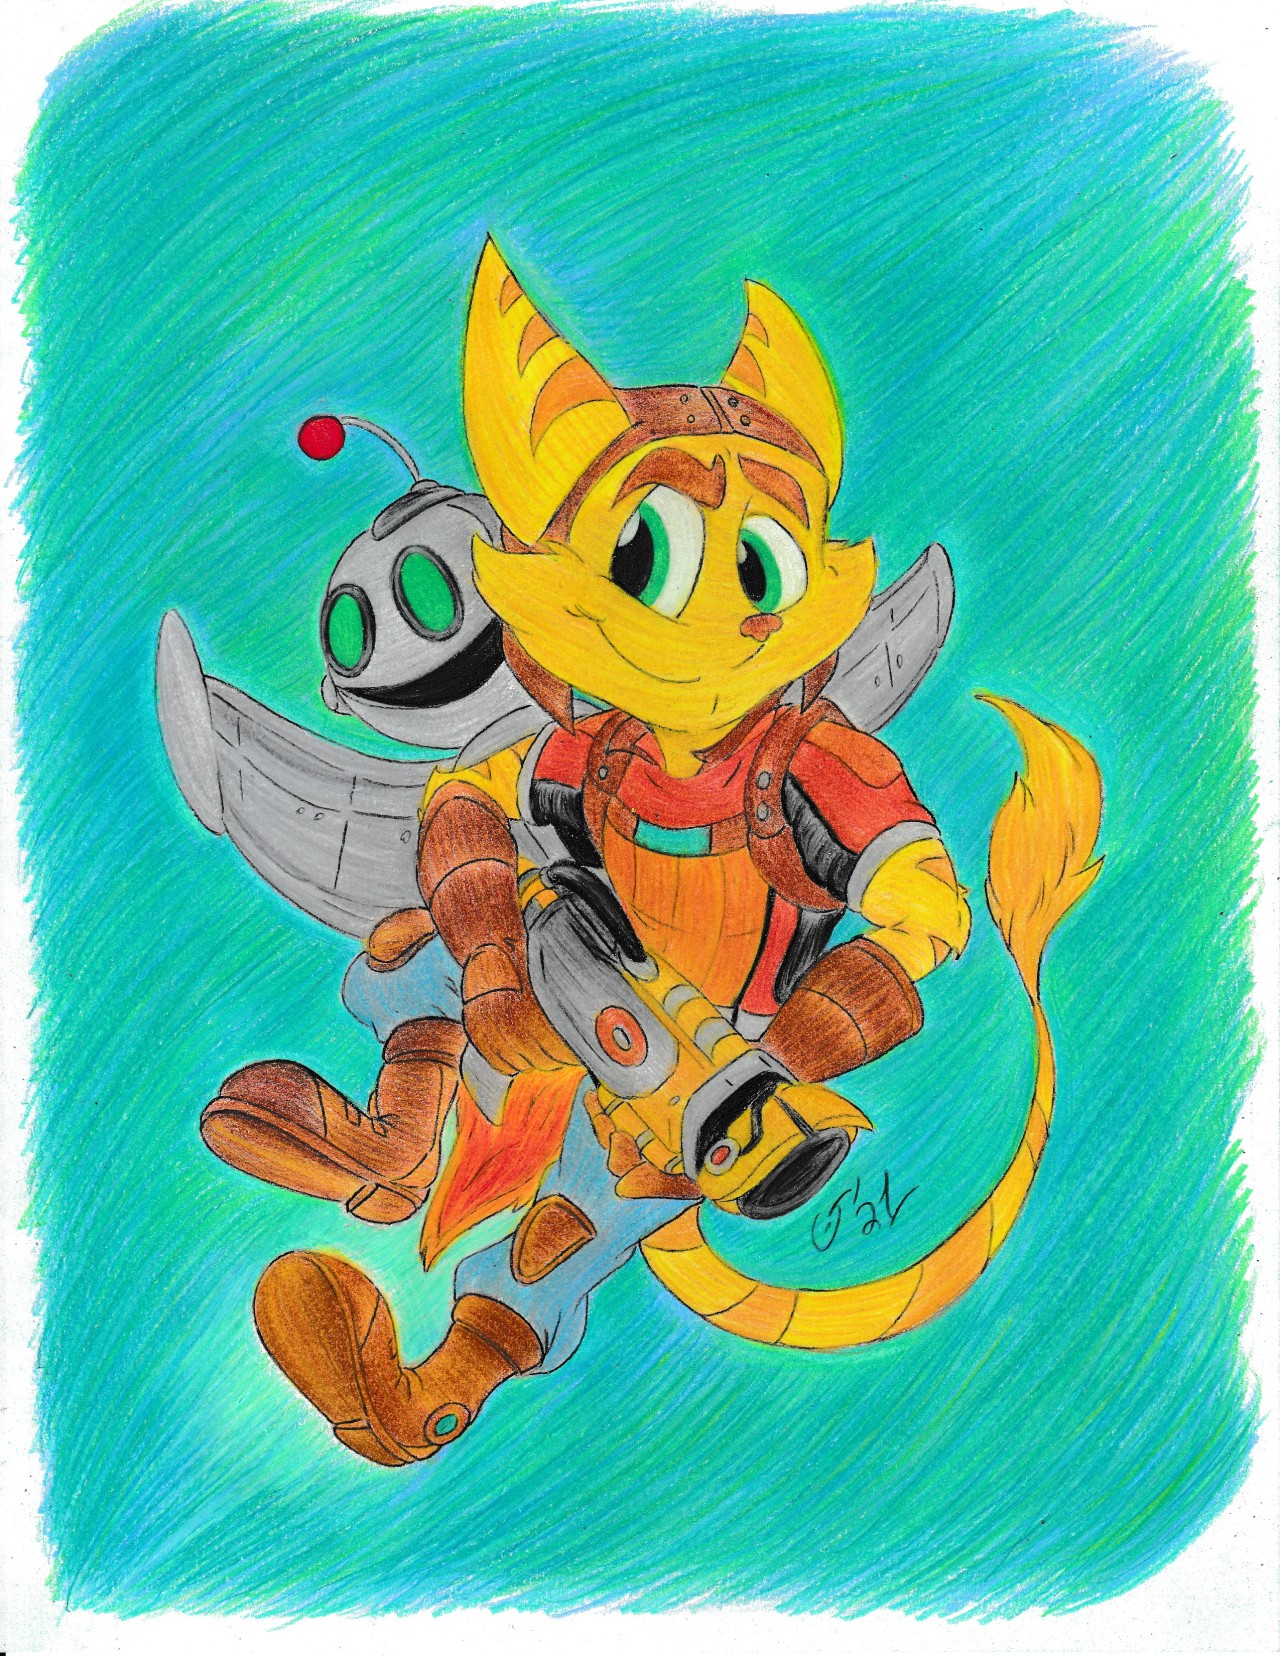 Albeit a bit late; here’s a Ratchet & Clank to celebrate the release of Rift Apart.